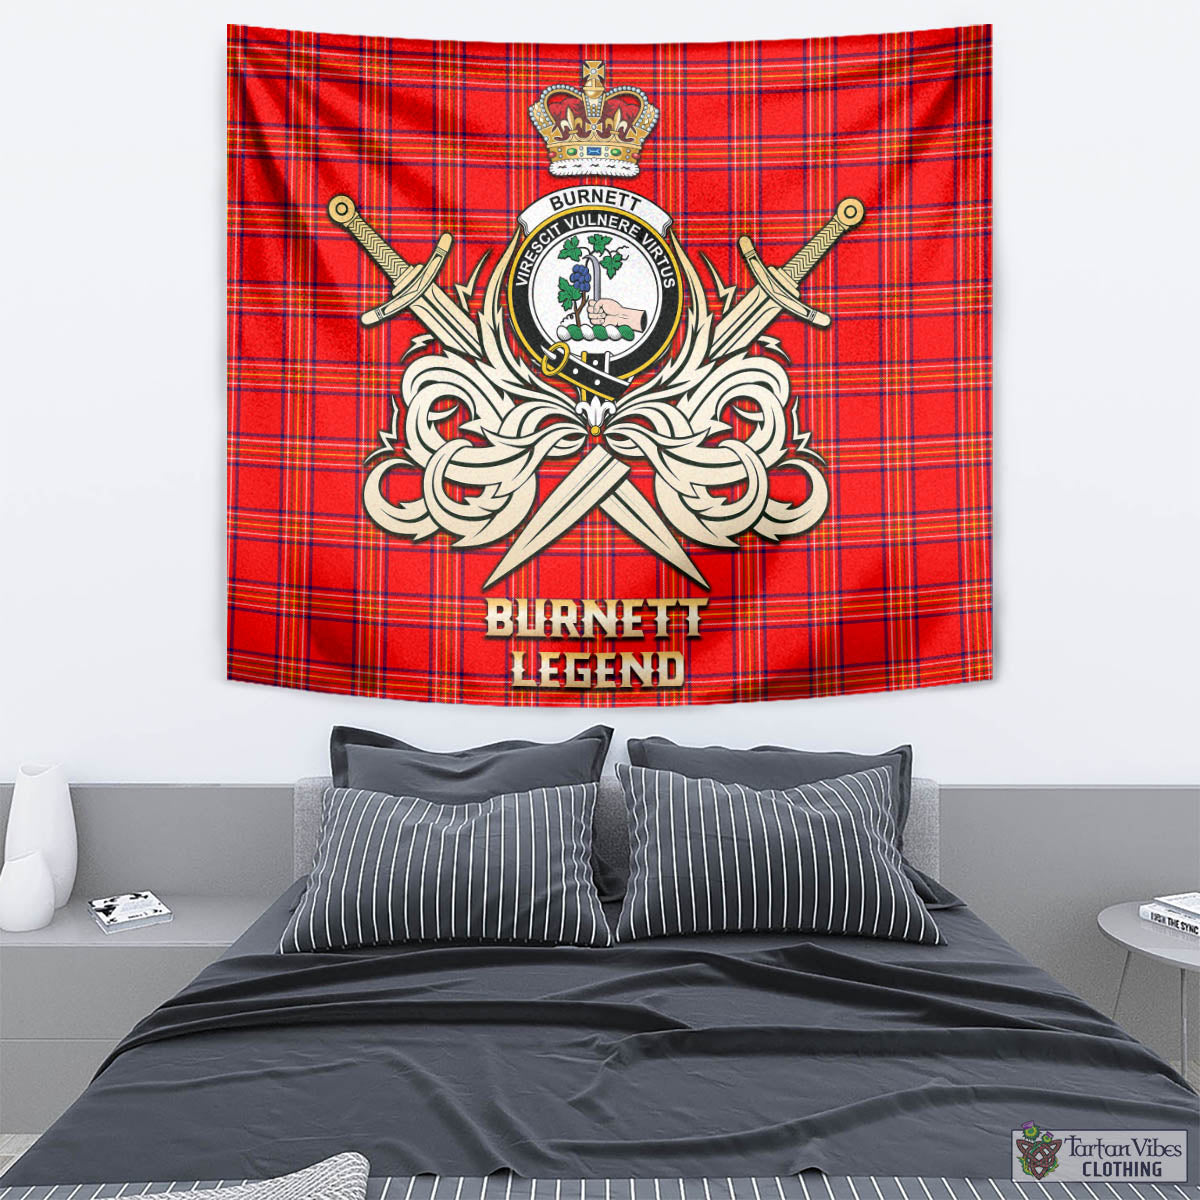 Tartan Vibes Clothing Burnett Modern Tartan Tapestry with Clan Crest and the Golden Sword of Courageous Legacy